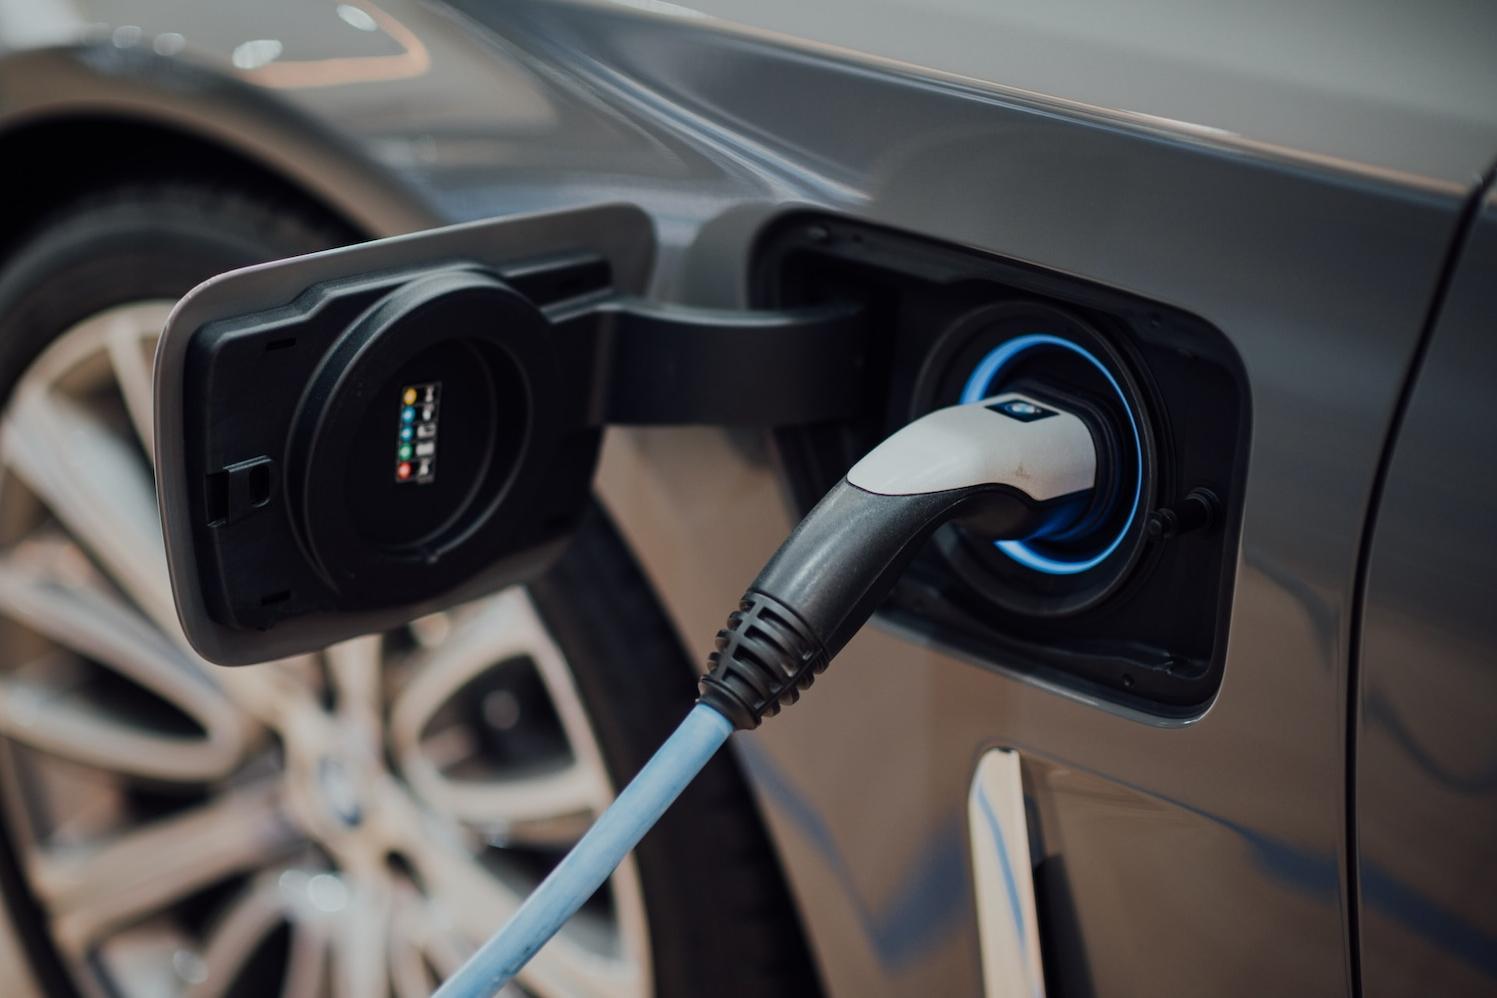 Electric vehicle charging - EV batteries used for energy storage